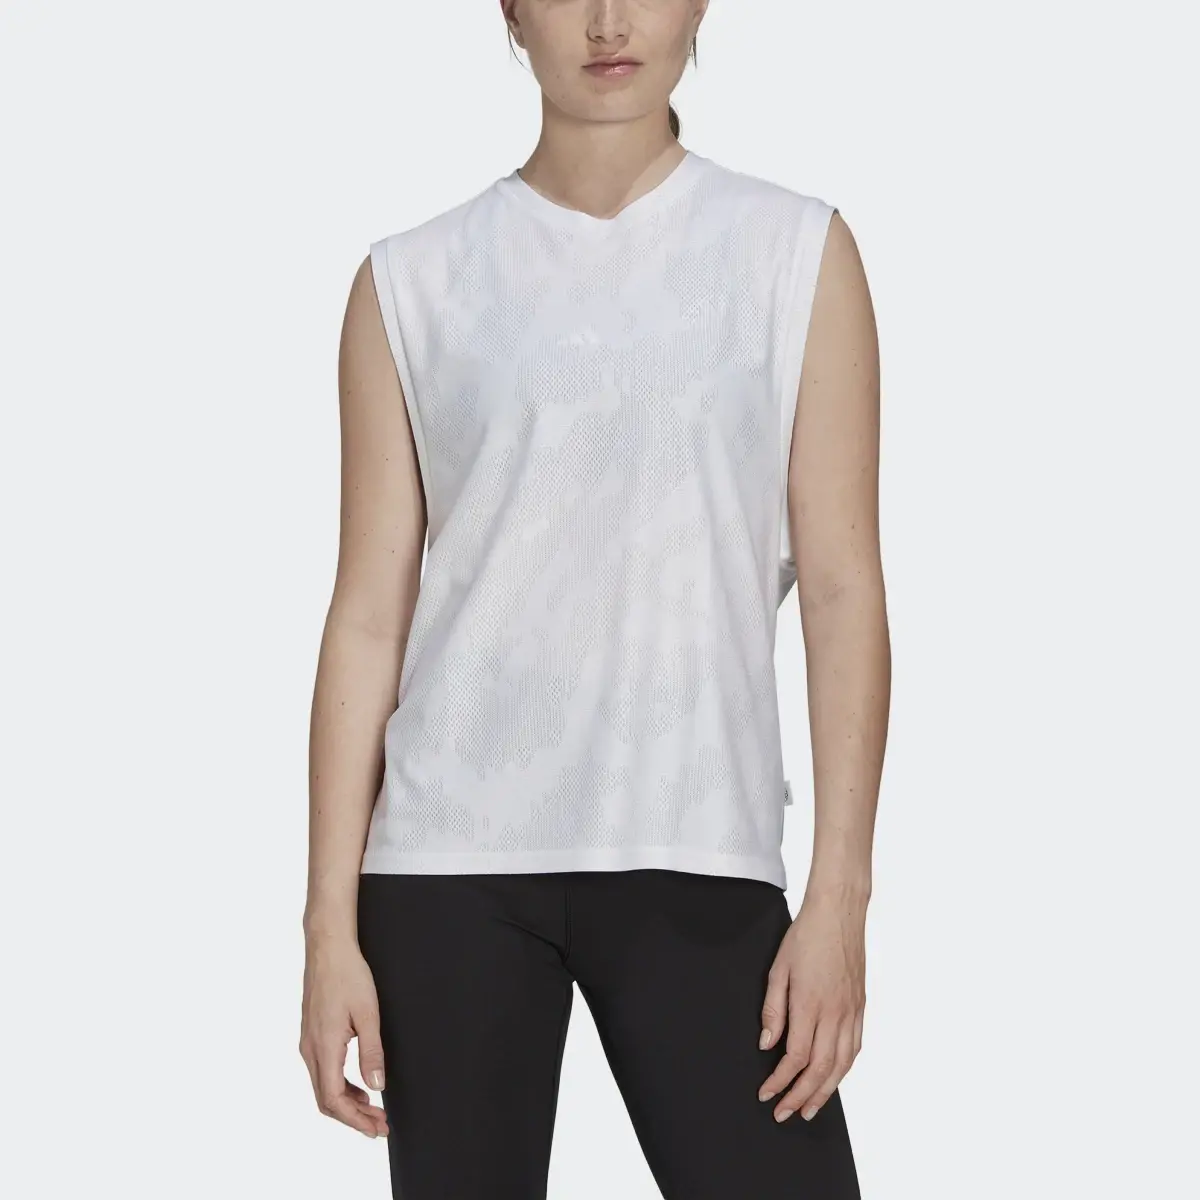 Adidas Made to Be Remade Running Tank Top. 1